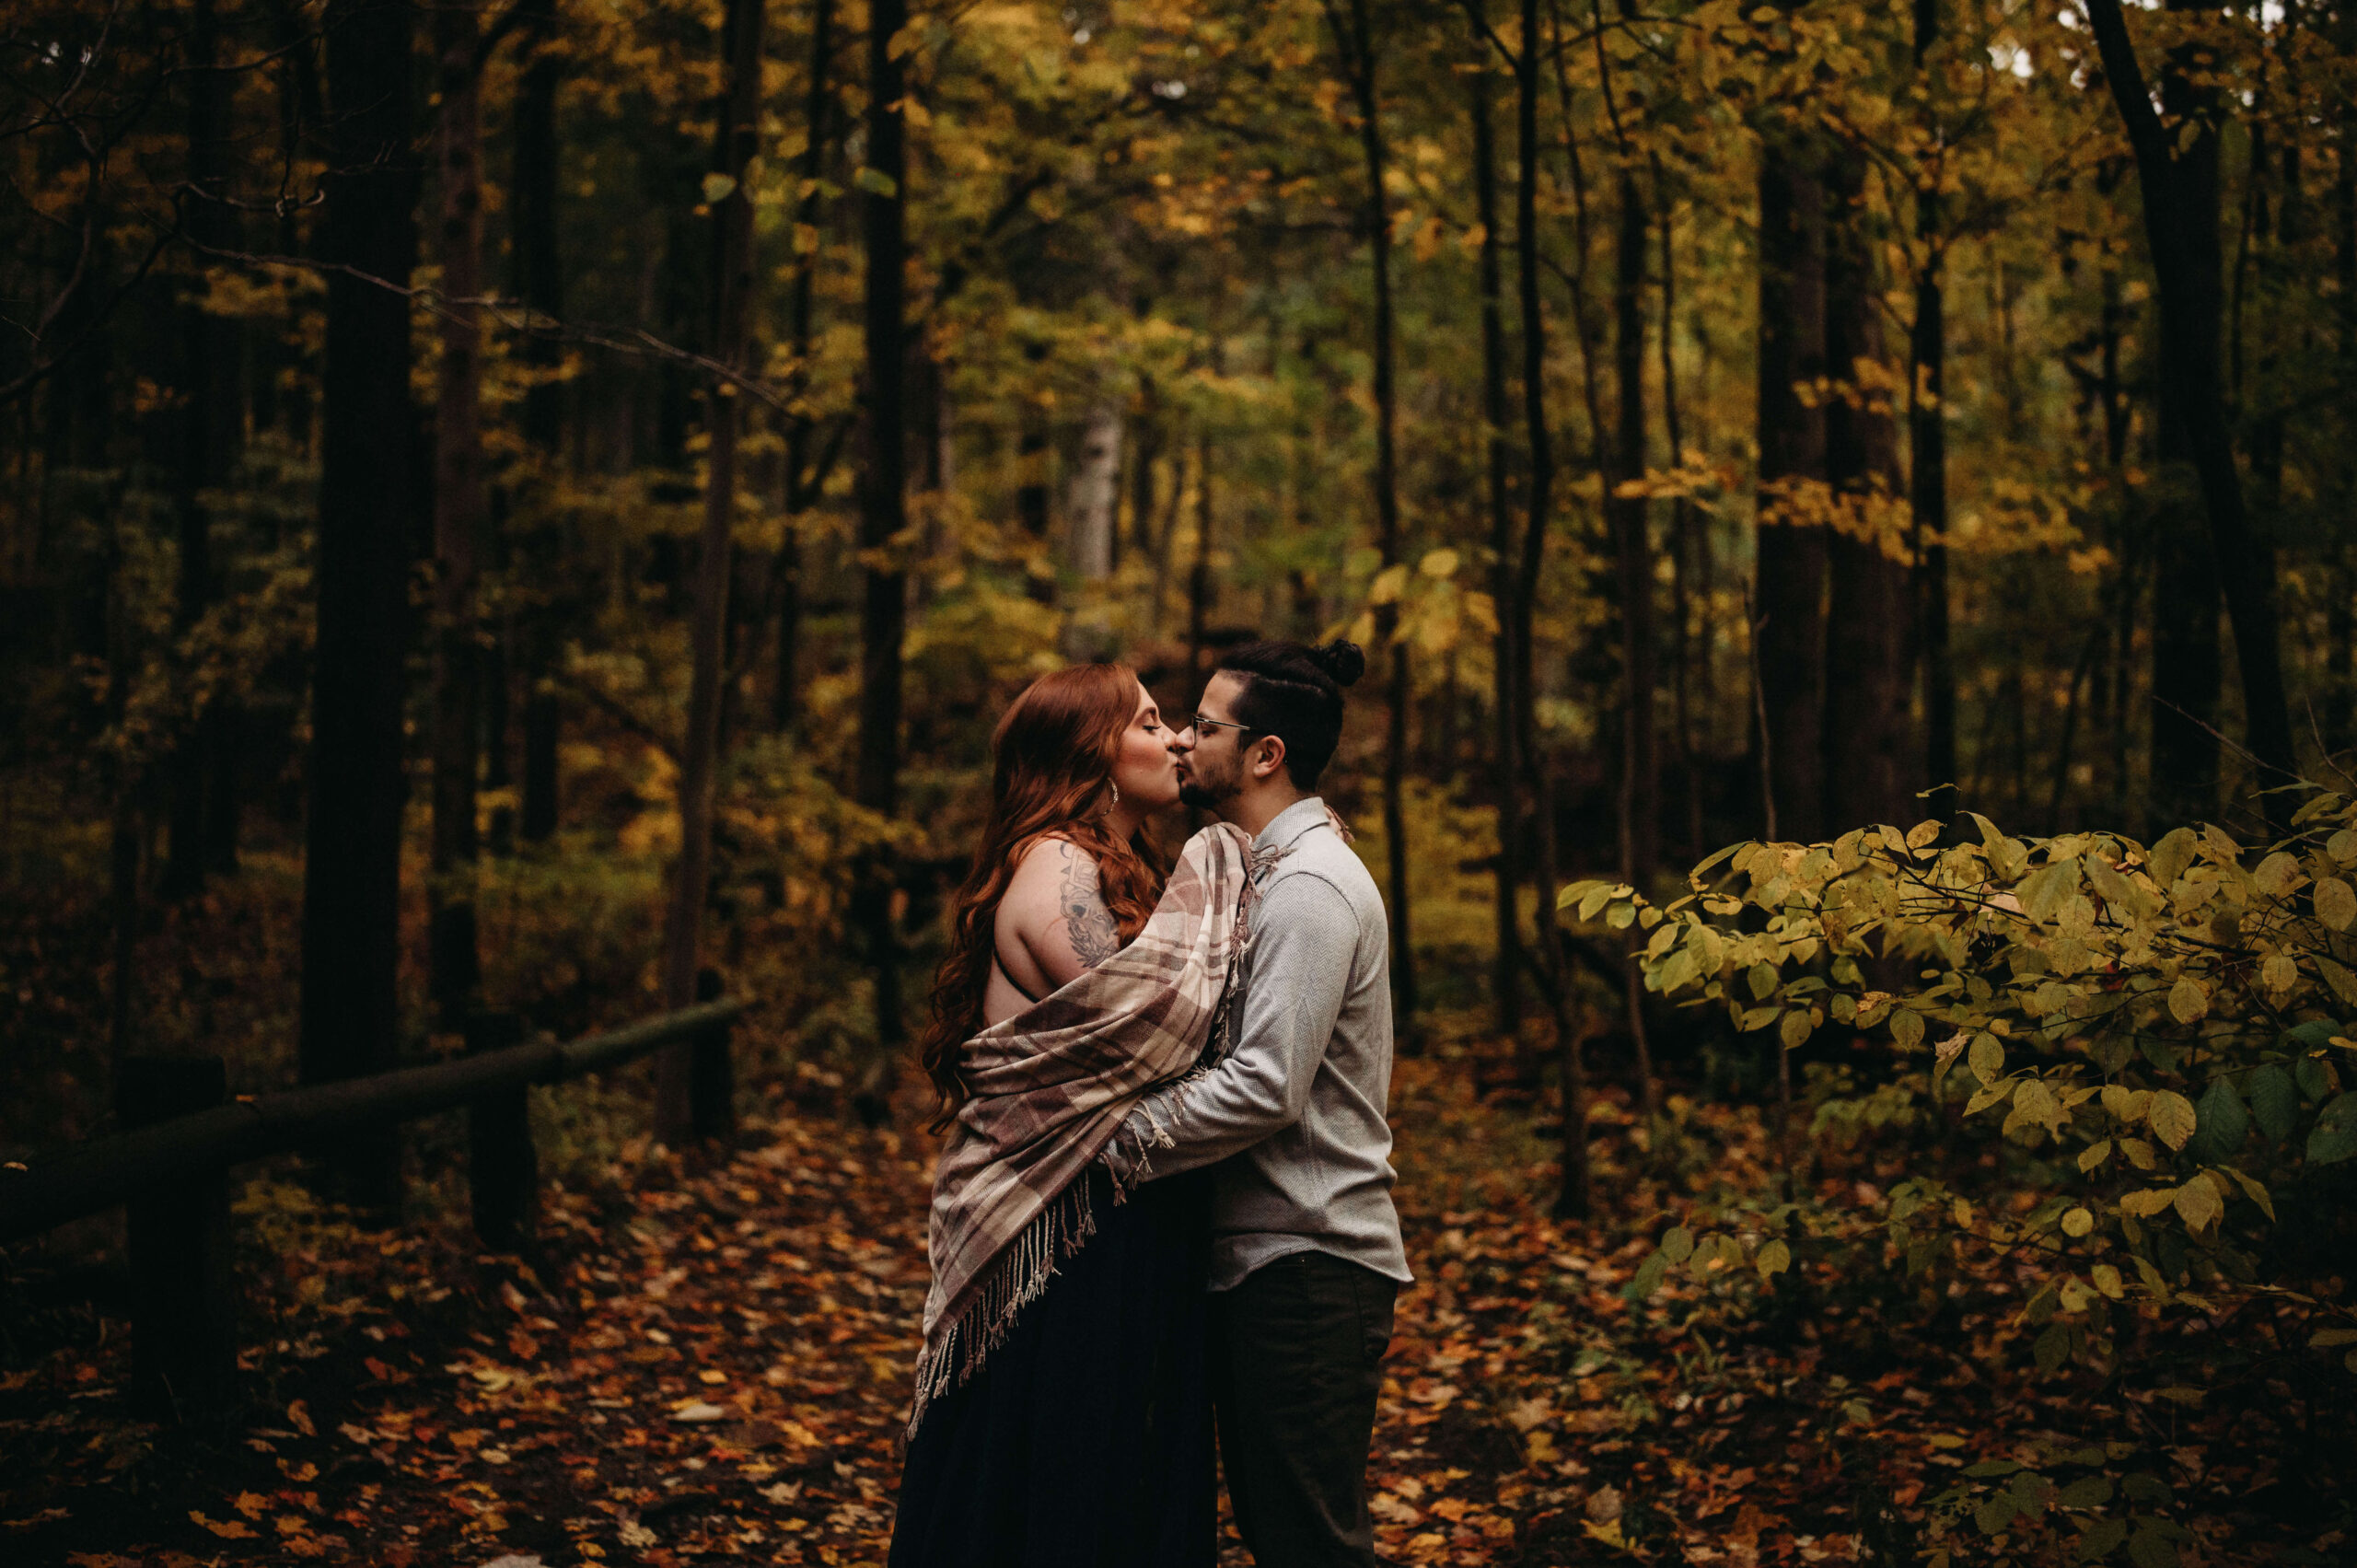 Couple kiss in a forest during fall time in Ohio.